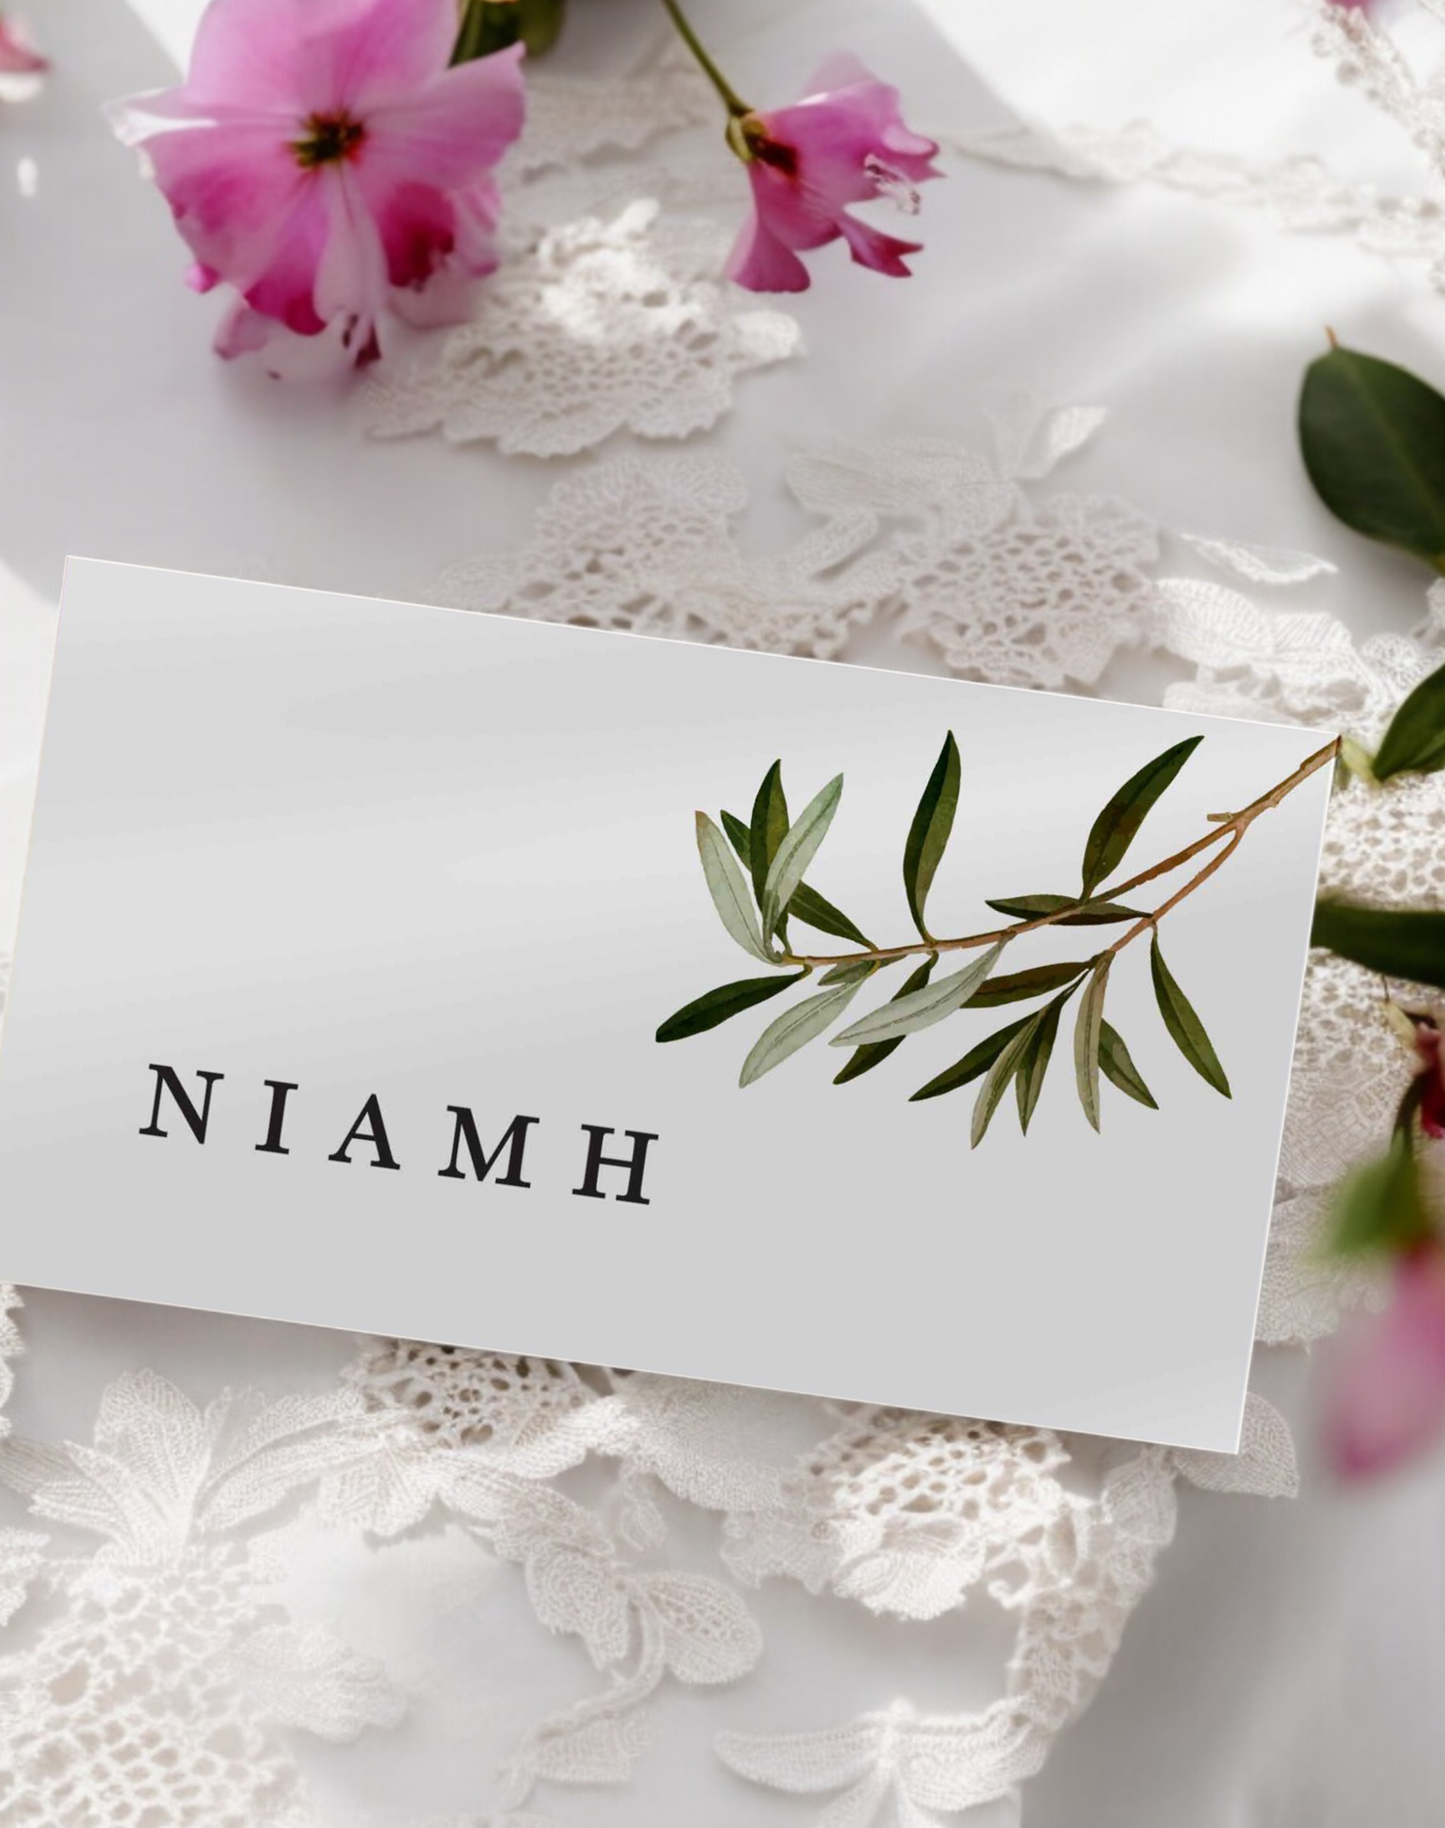 Niamh | Greek Place Card - Ivy and Gold Wedding Stationery -  